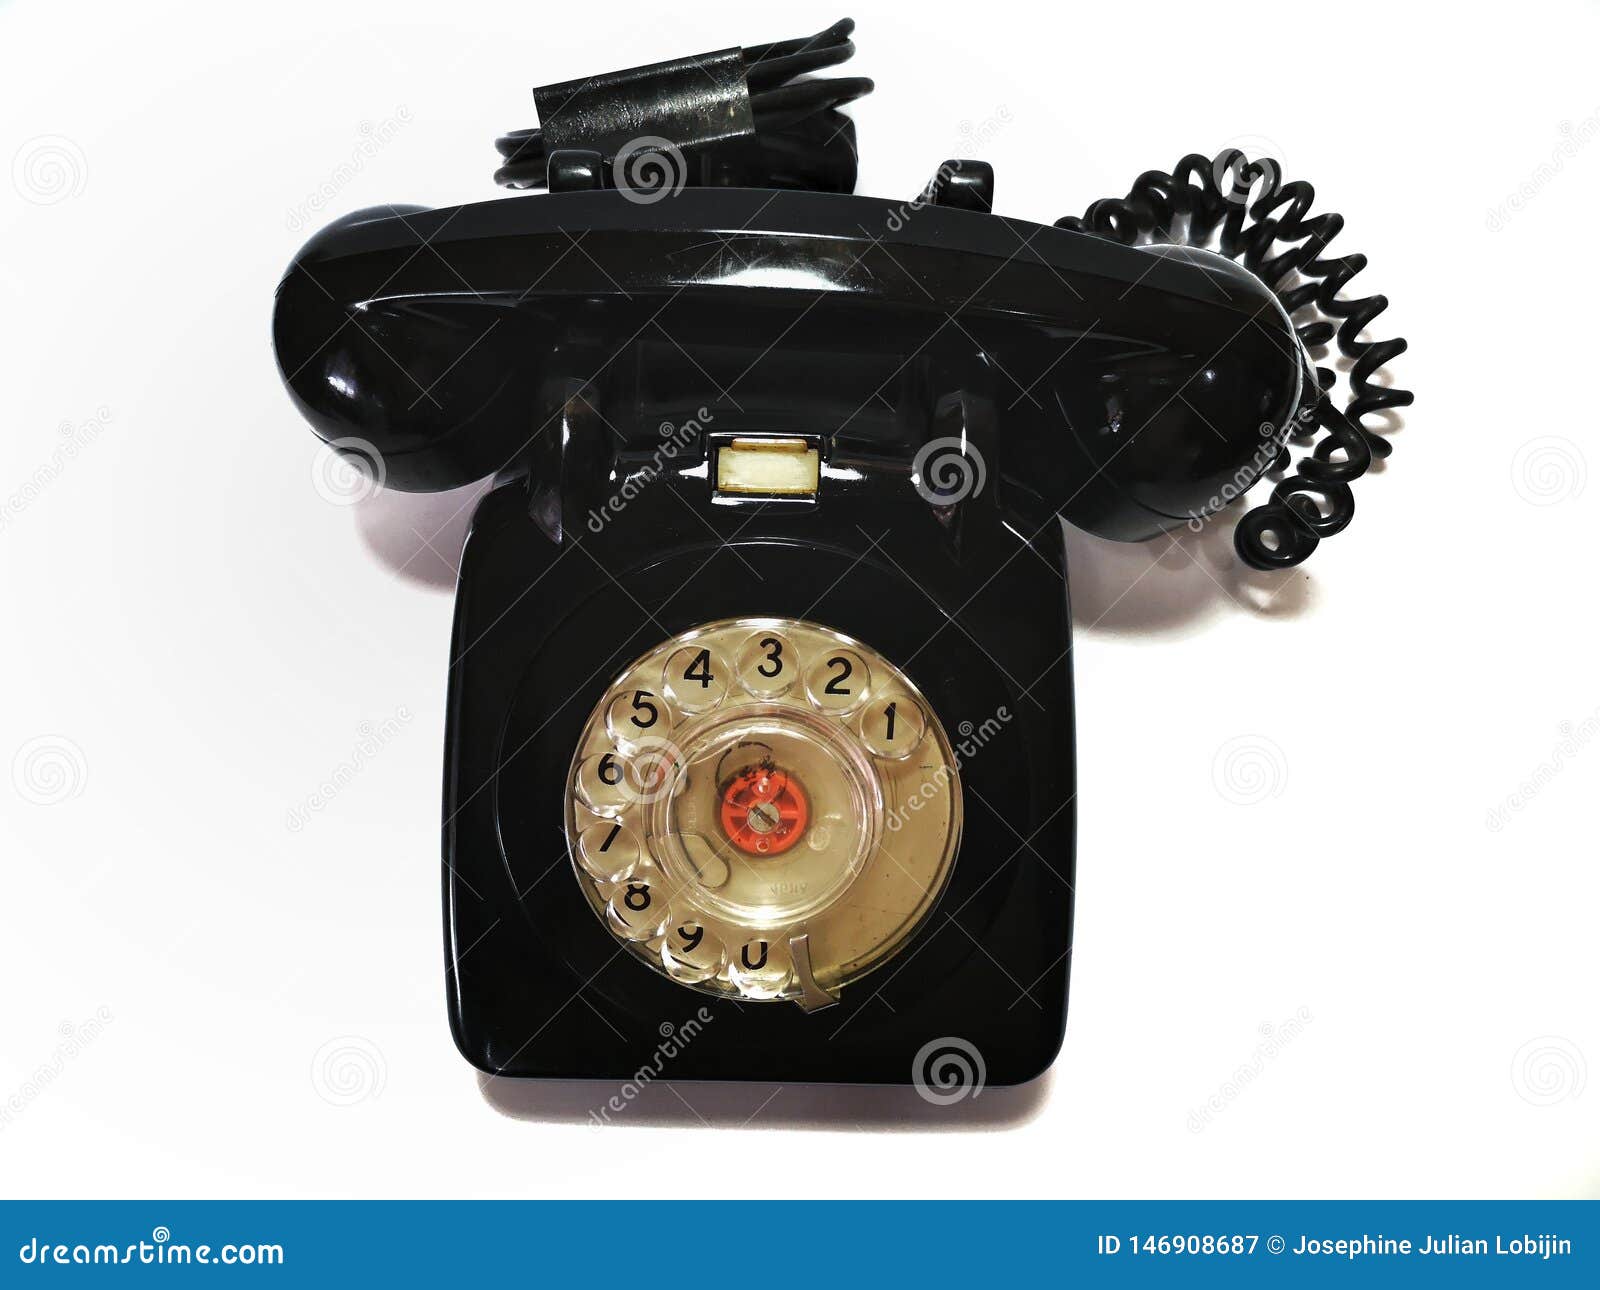 a vintage and antique telephone with white background.